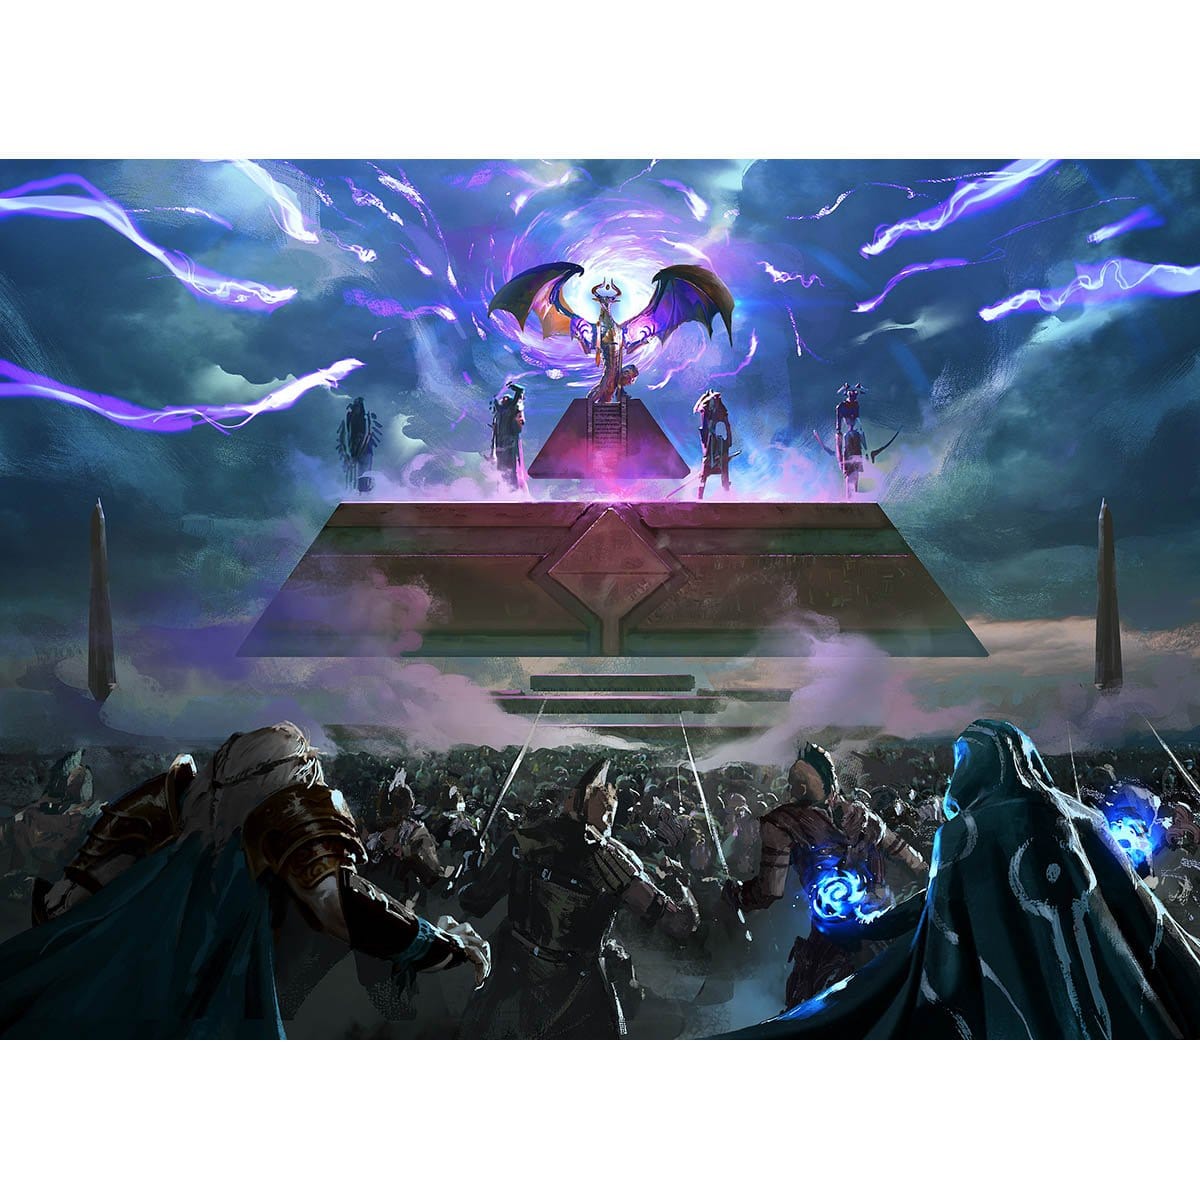 Storm the Citadel Print - Print - Original Magic Art - Accessories for Magic the Gathering and other card games